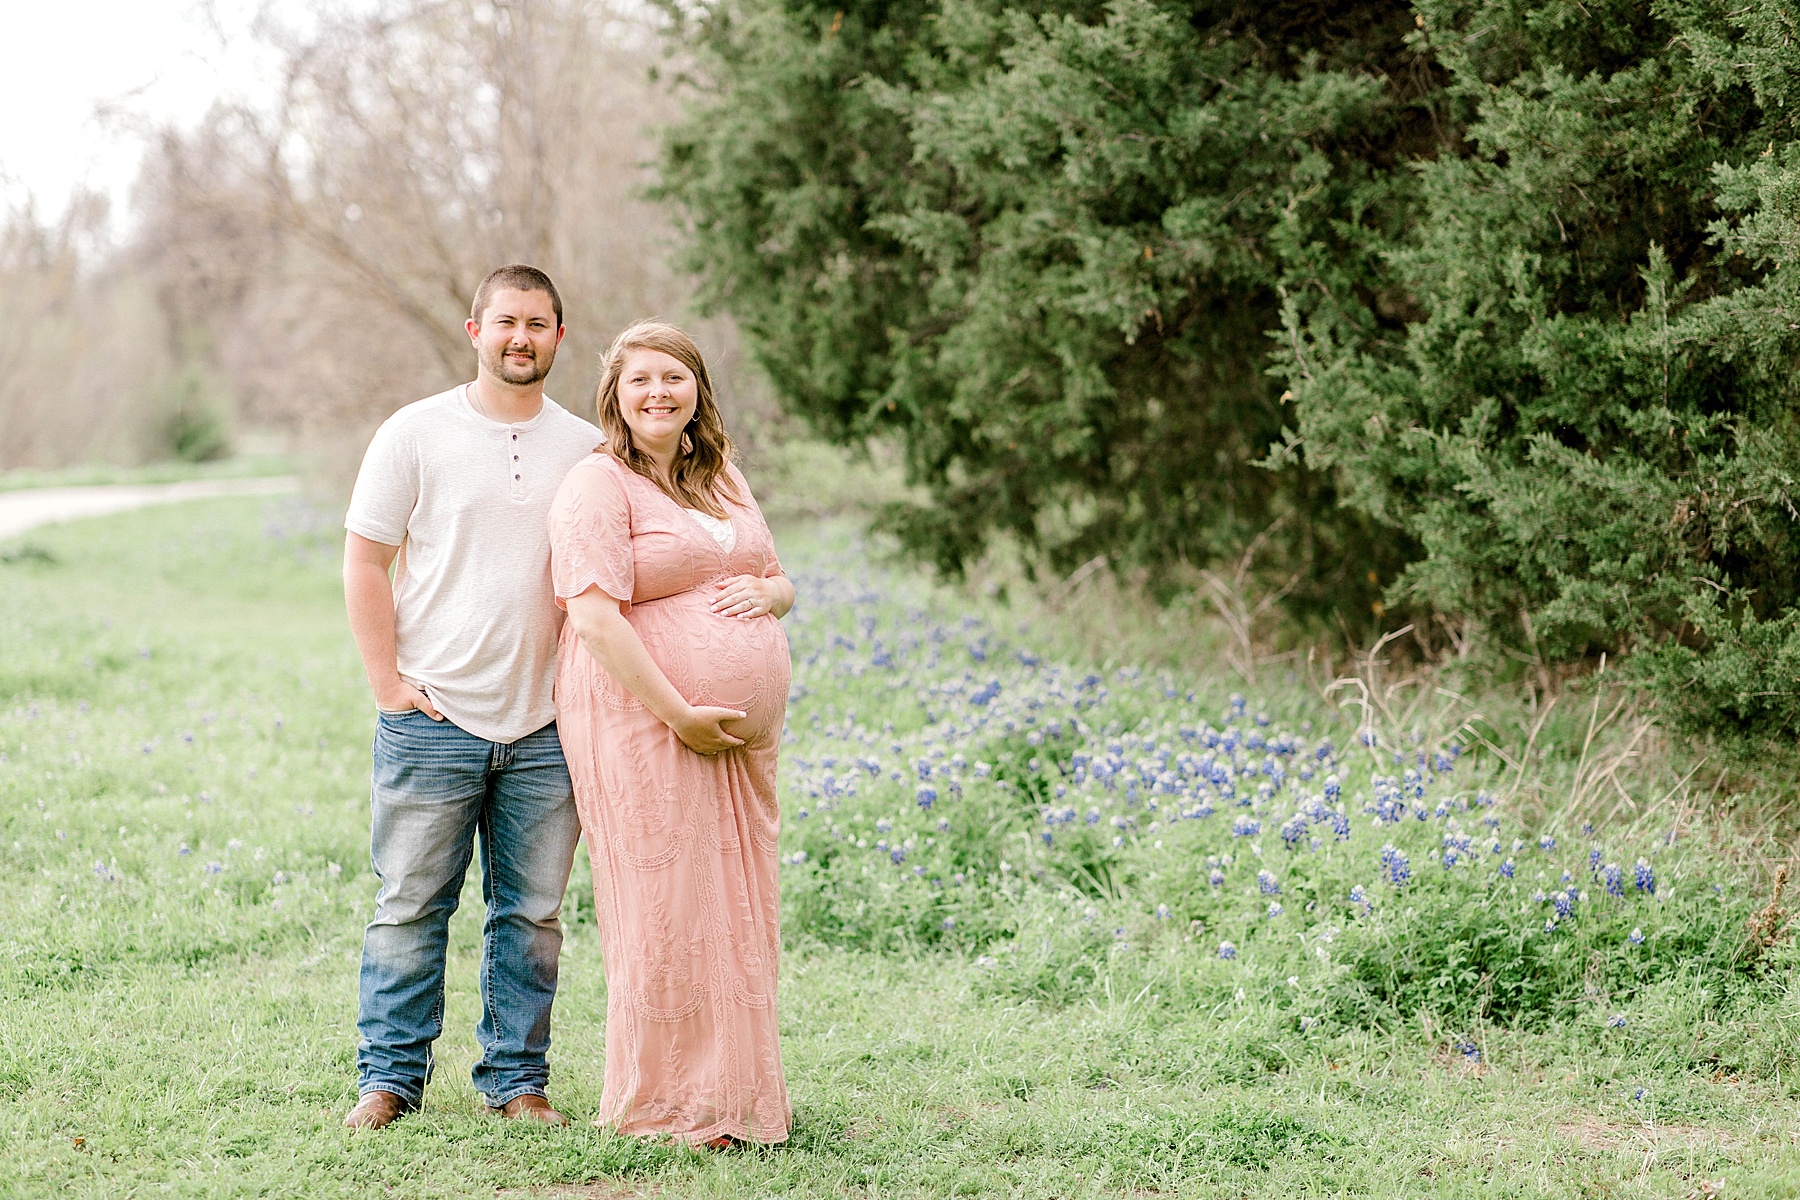 Sweet Spring Maternity Session (Euless, TX)| Becca Sue Photography - beccasuephotography.com